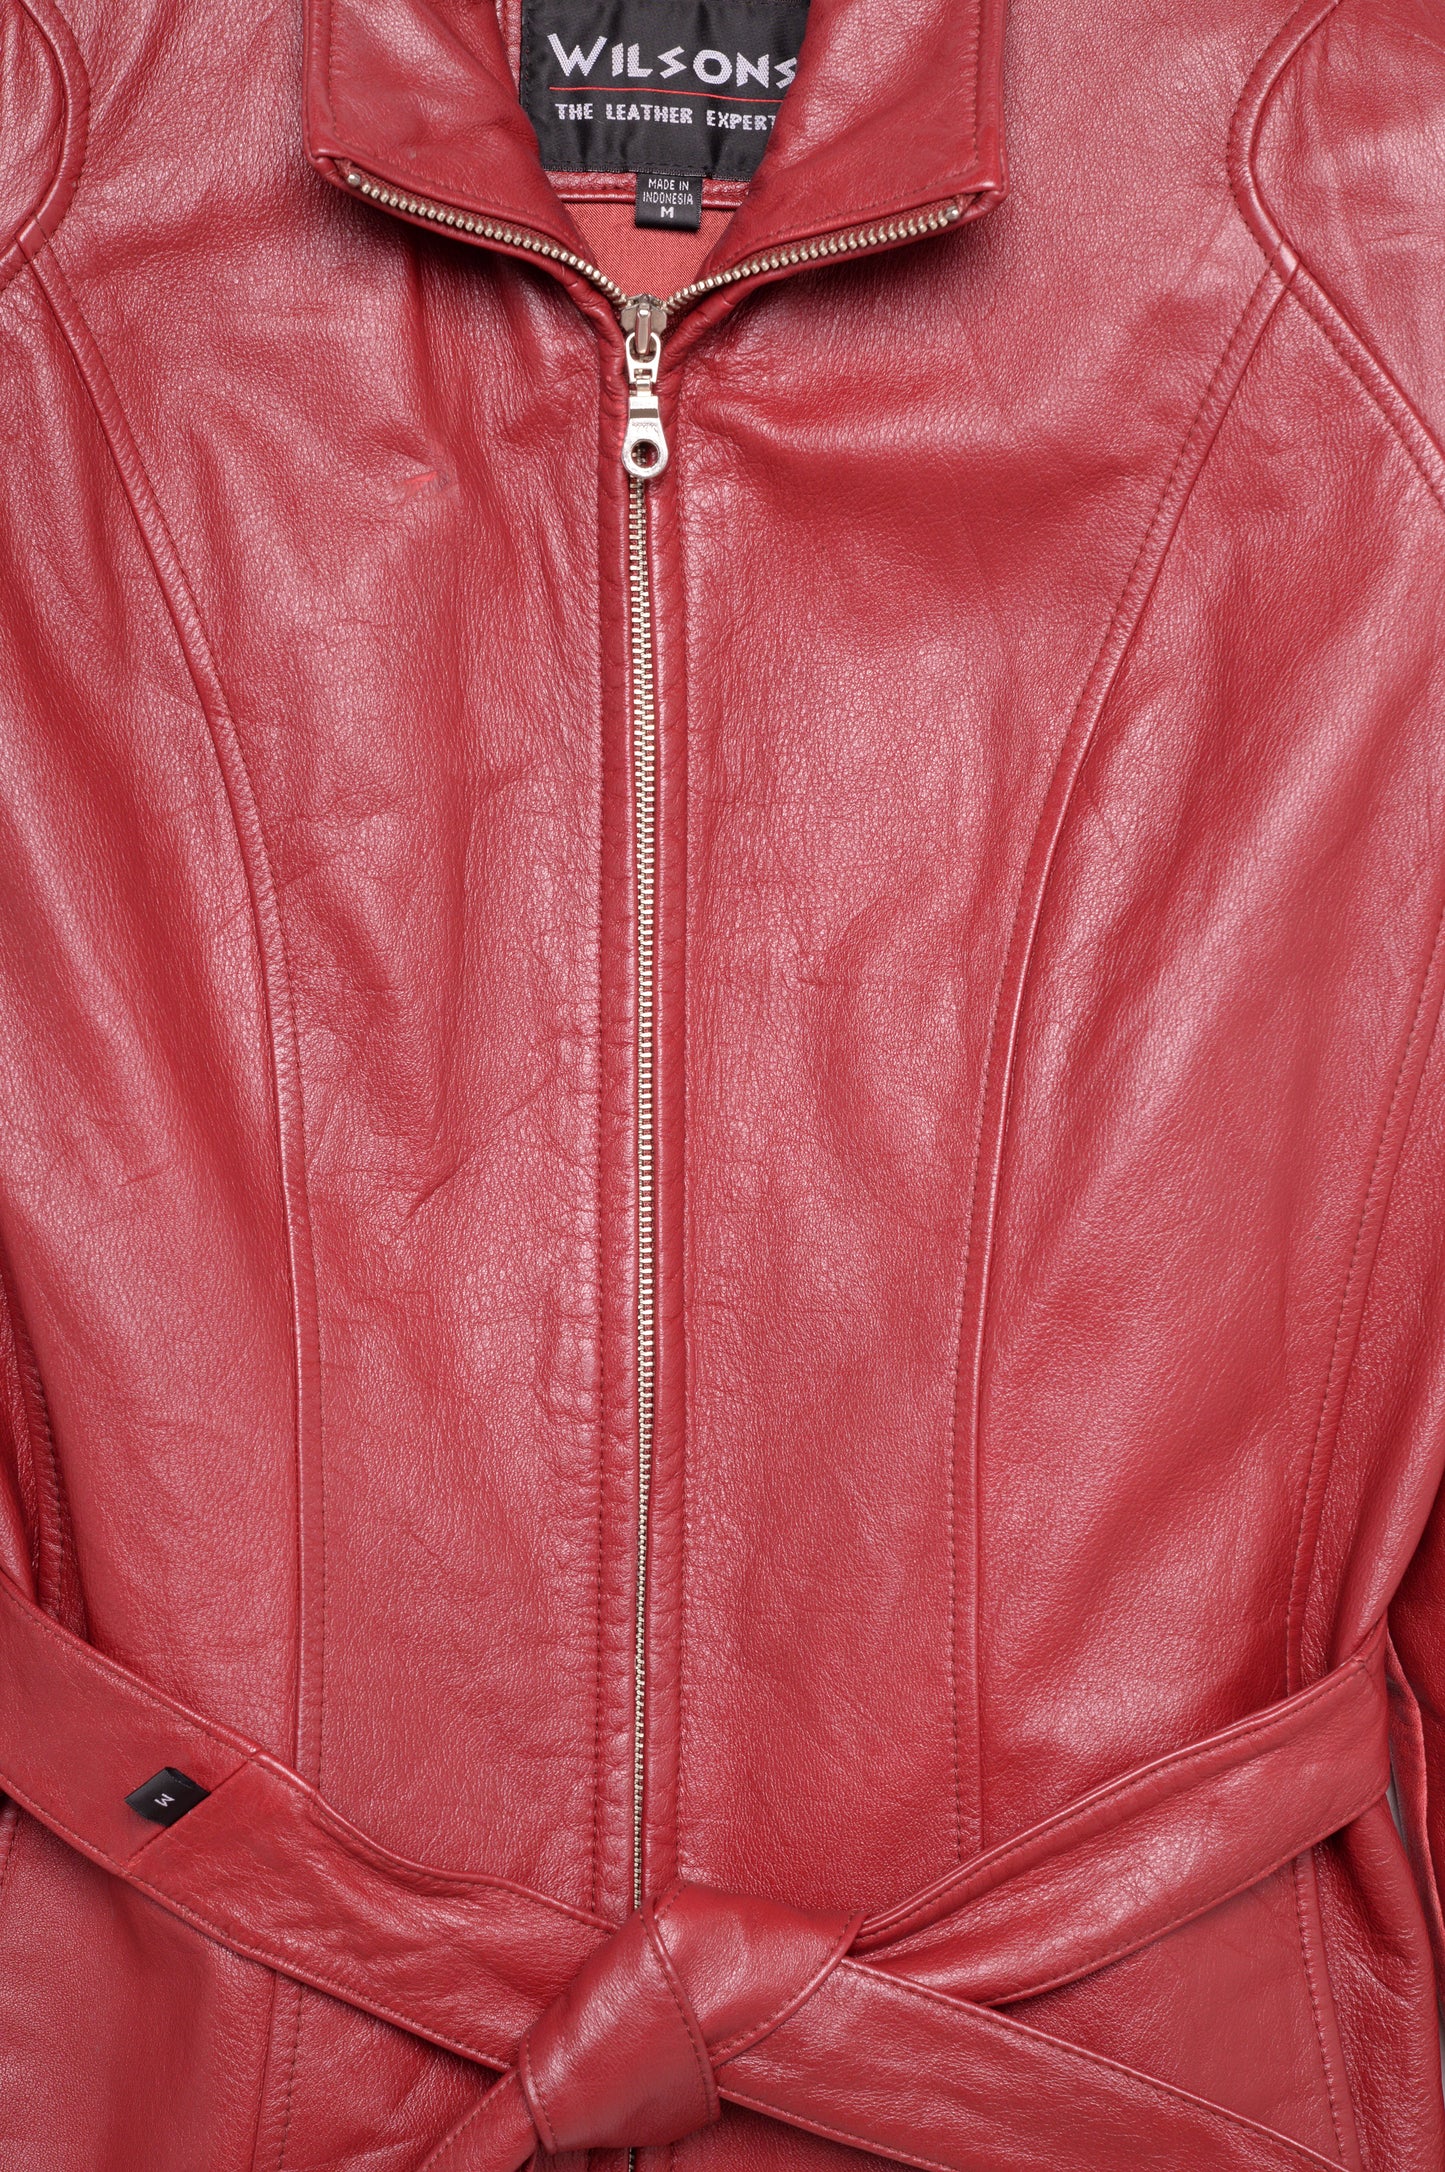 1990s Wilson's Belted Leather Jacket